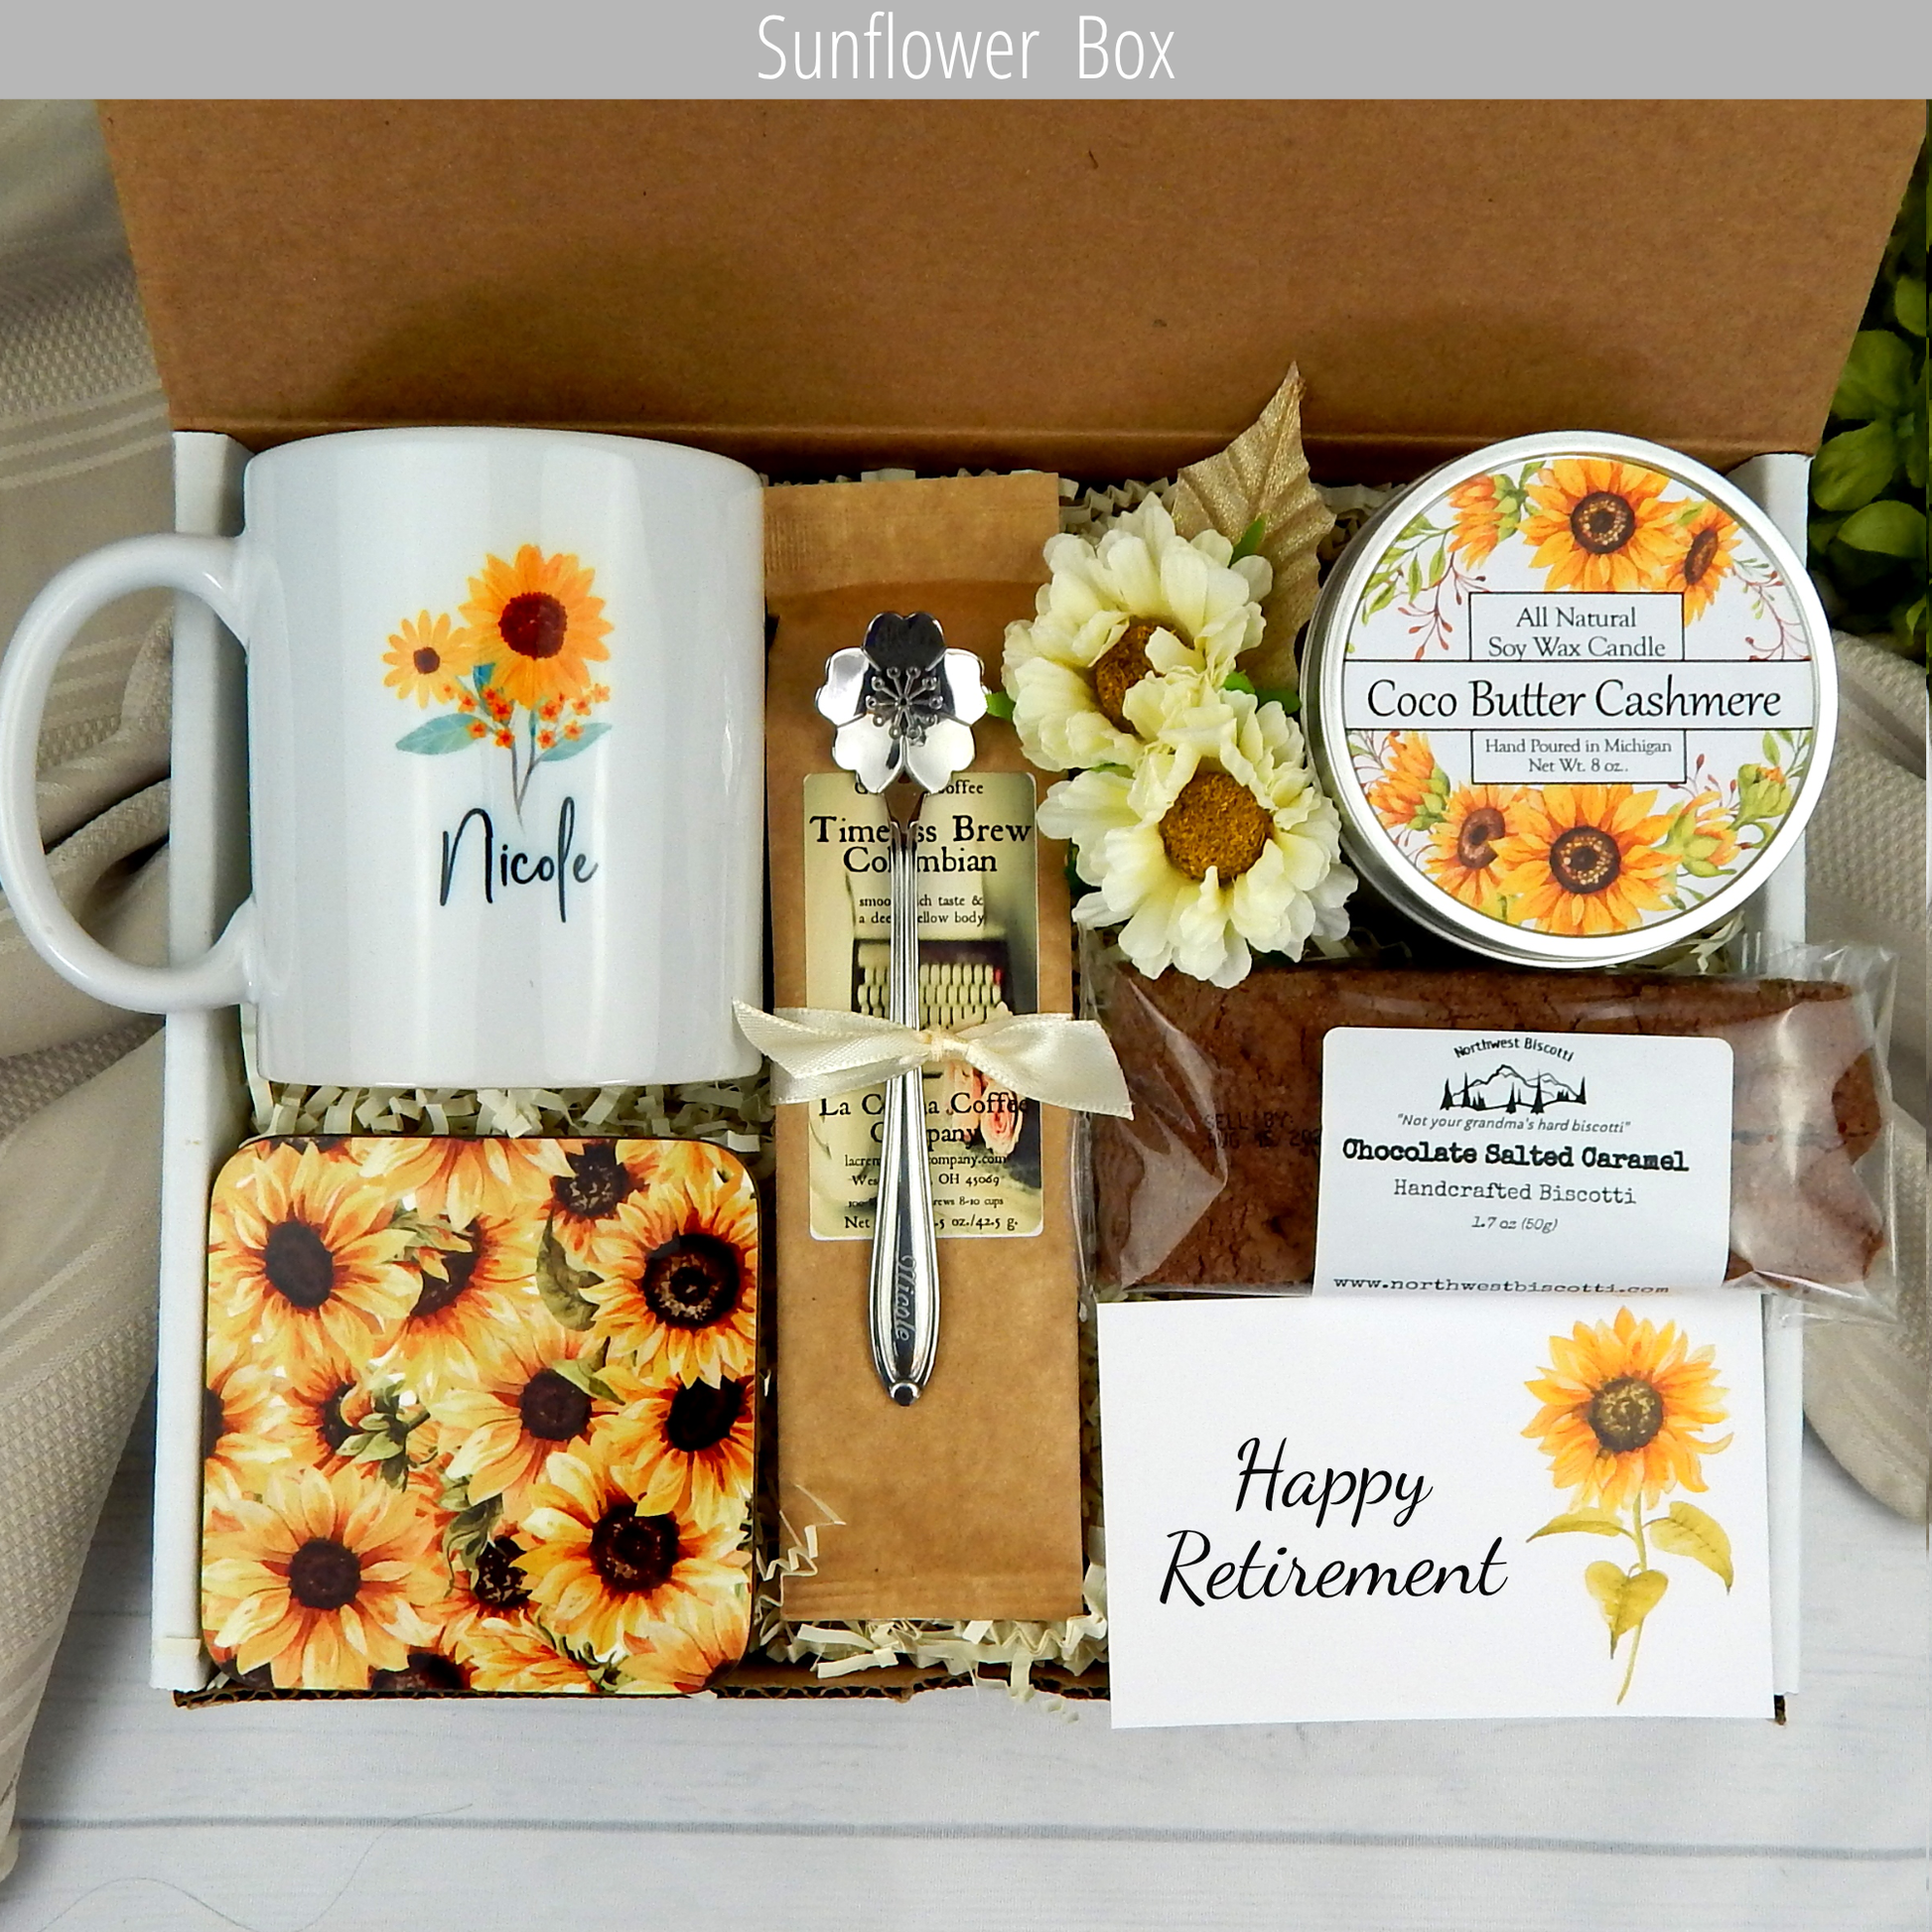 Well-deserved rest: Gift basket for her with a personalized mug, coffee, and comforting treats for her retirement.